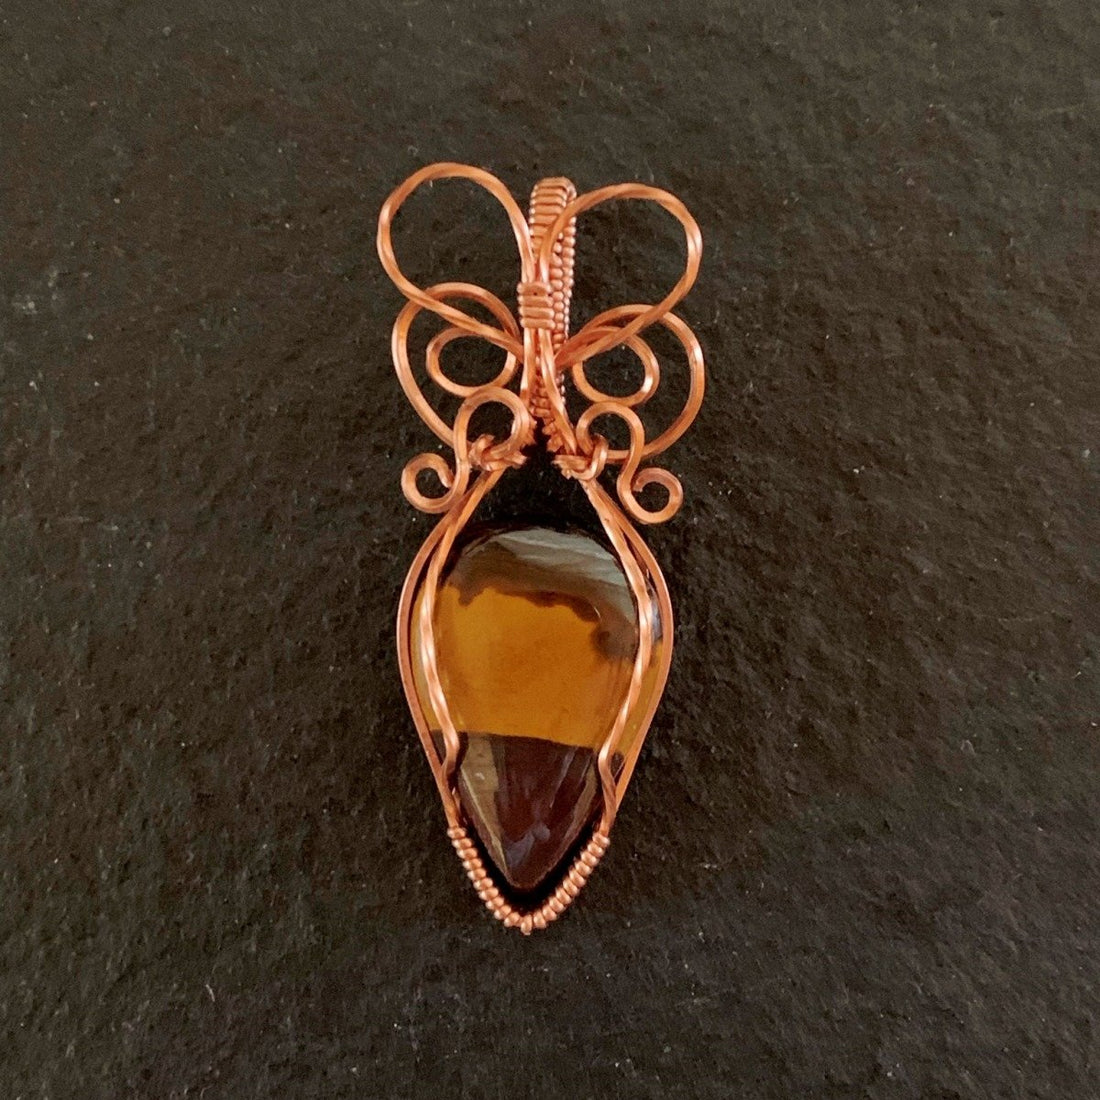 Pendant made of Natural Desert Jasper Teardrop stone with copper wire wrap; 7/8" w x 2" long, incl bail